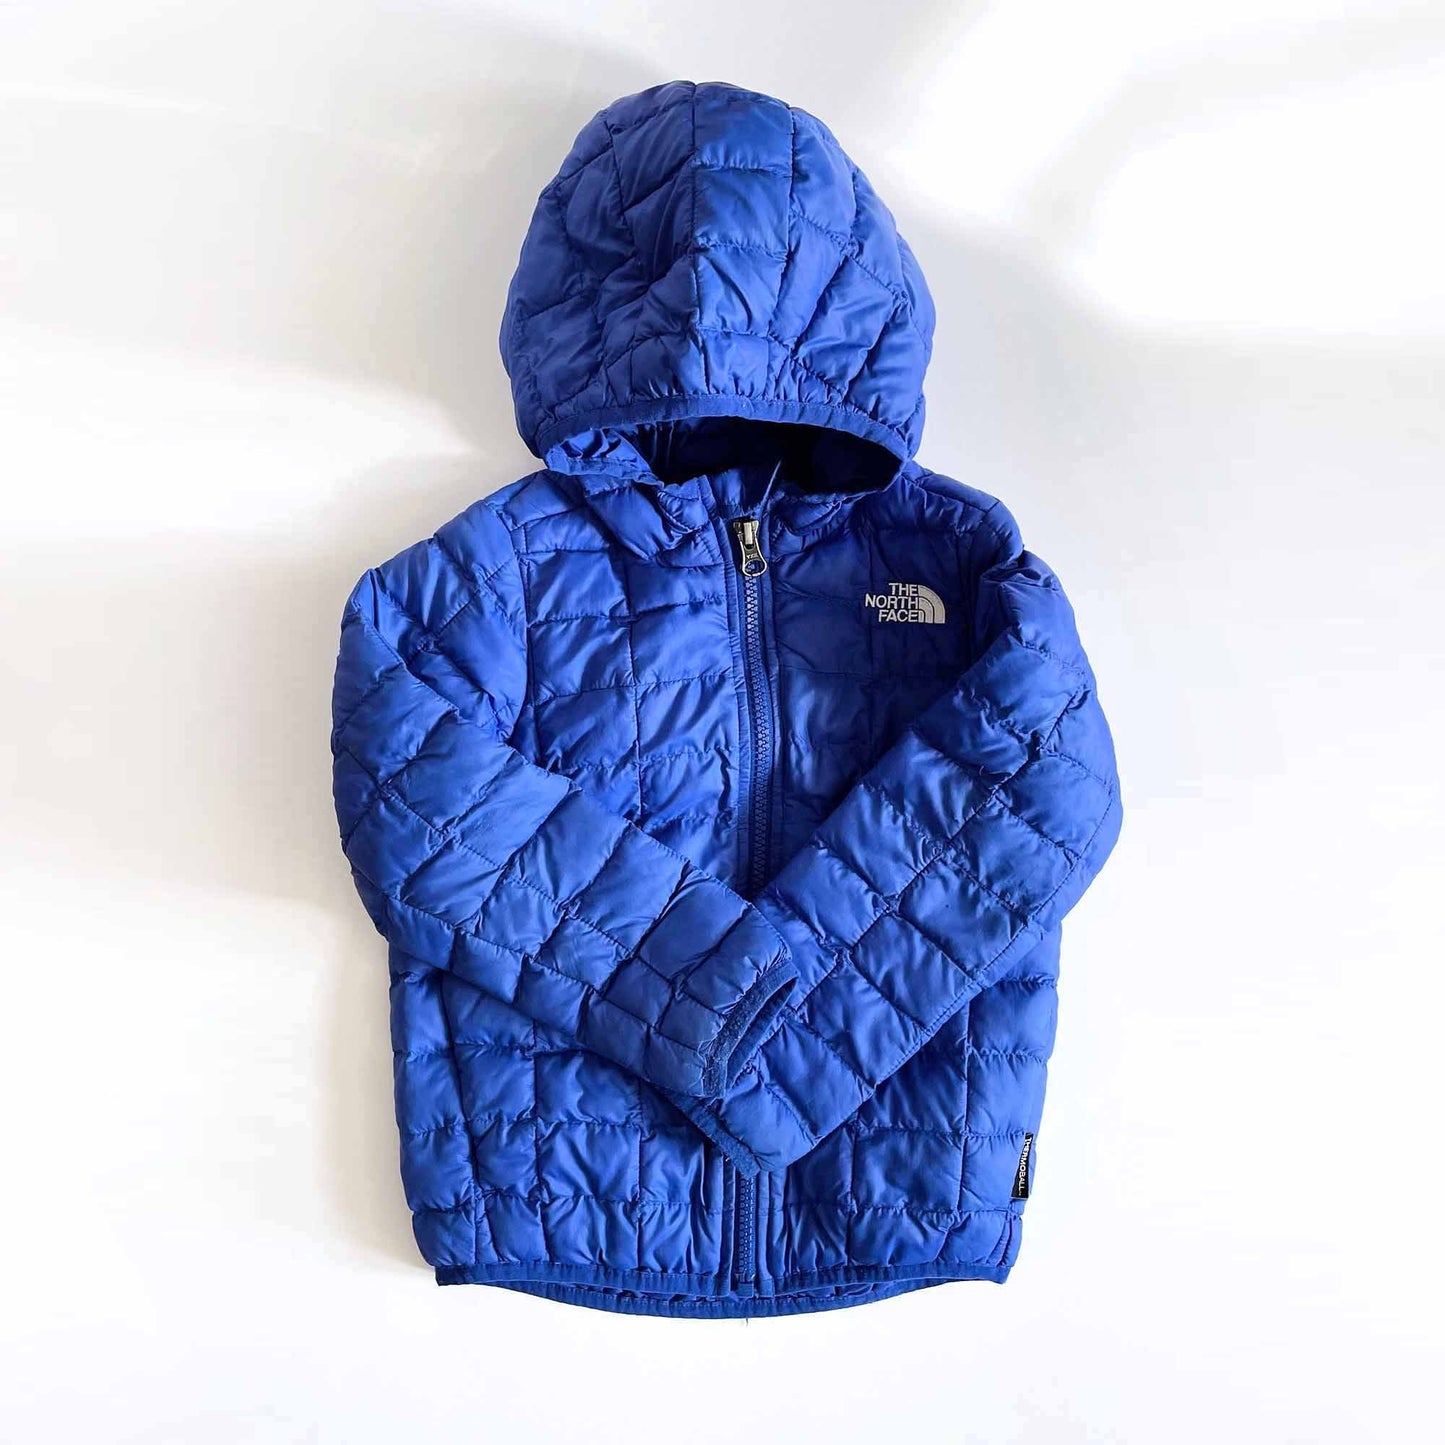 the north face kids eco thermoball hooded jacket - size 4T